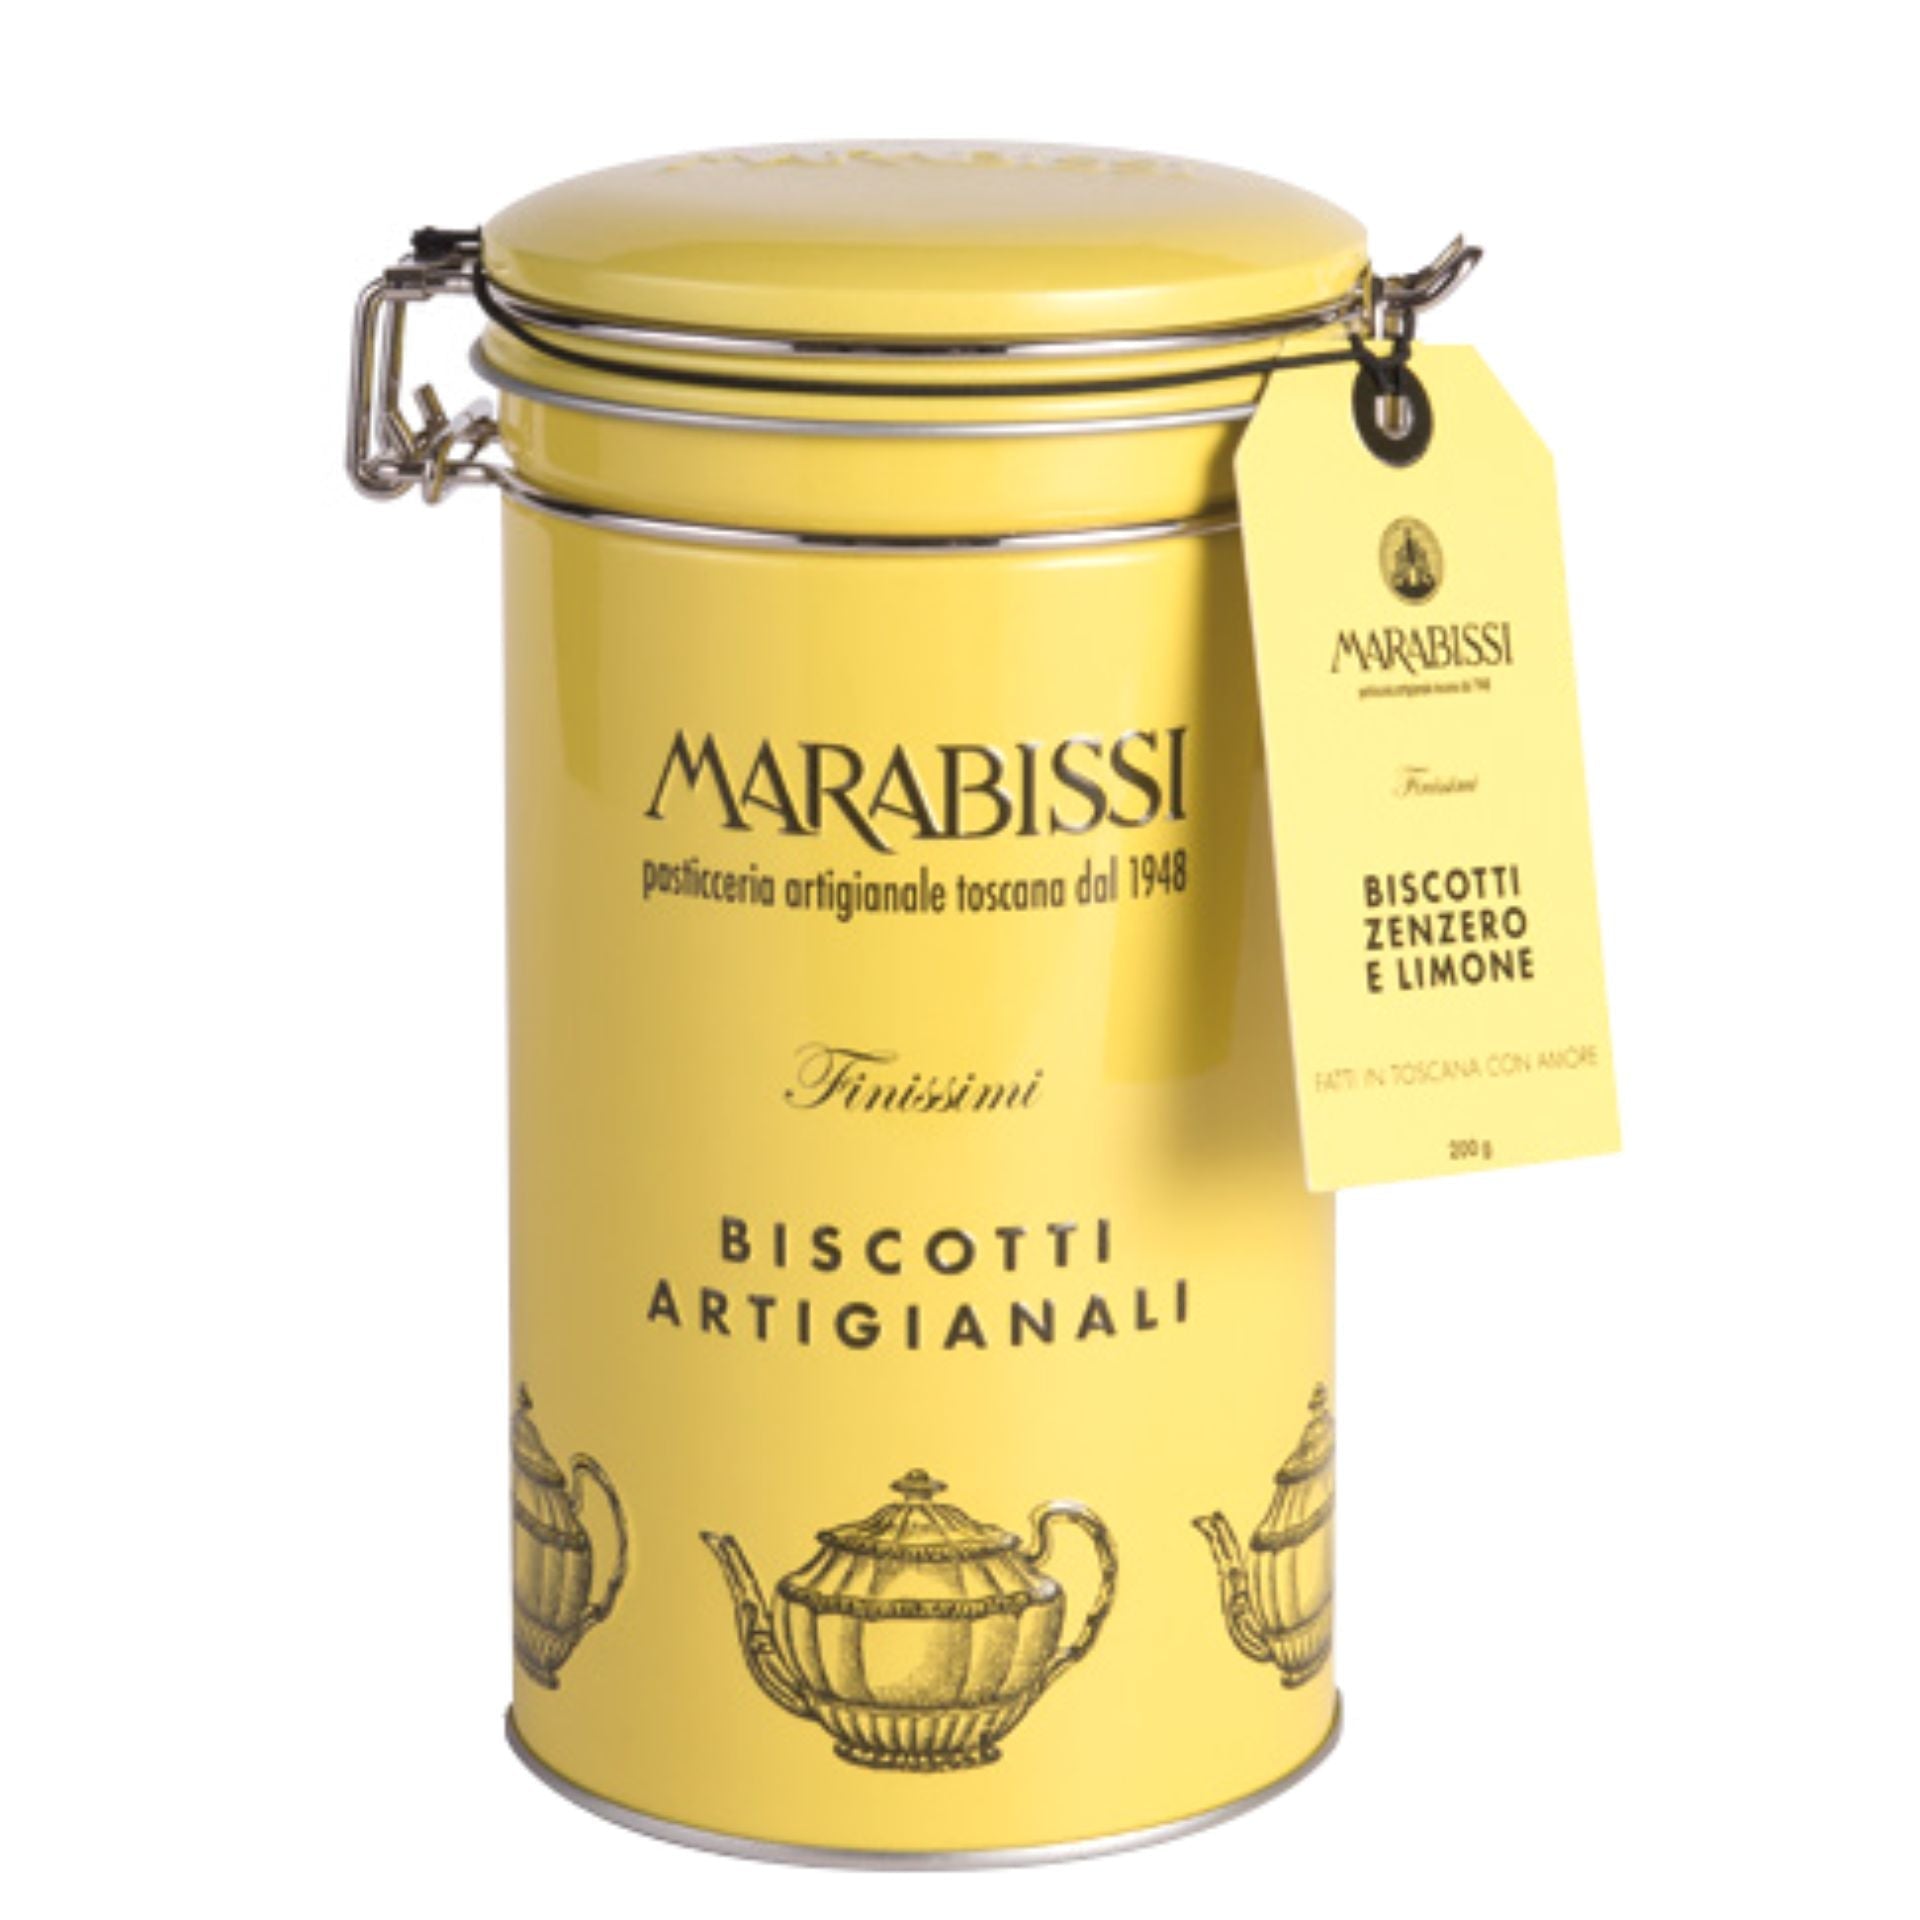 Marabissi Lemon & Ginger Artisan Biscuits (Tin) 200g  | Imported and distributed in the UK by Just Gourmet Foods